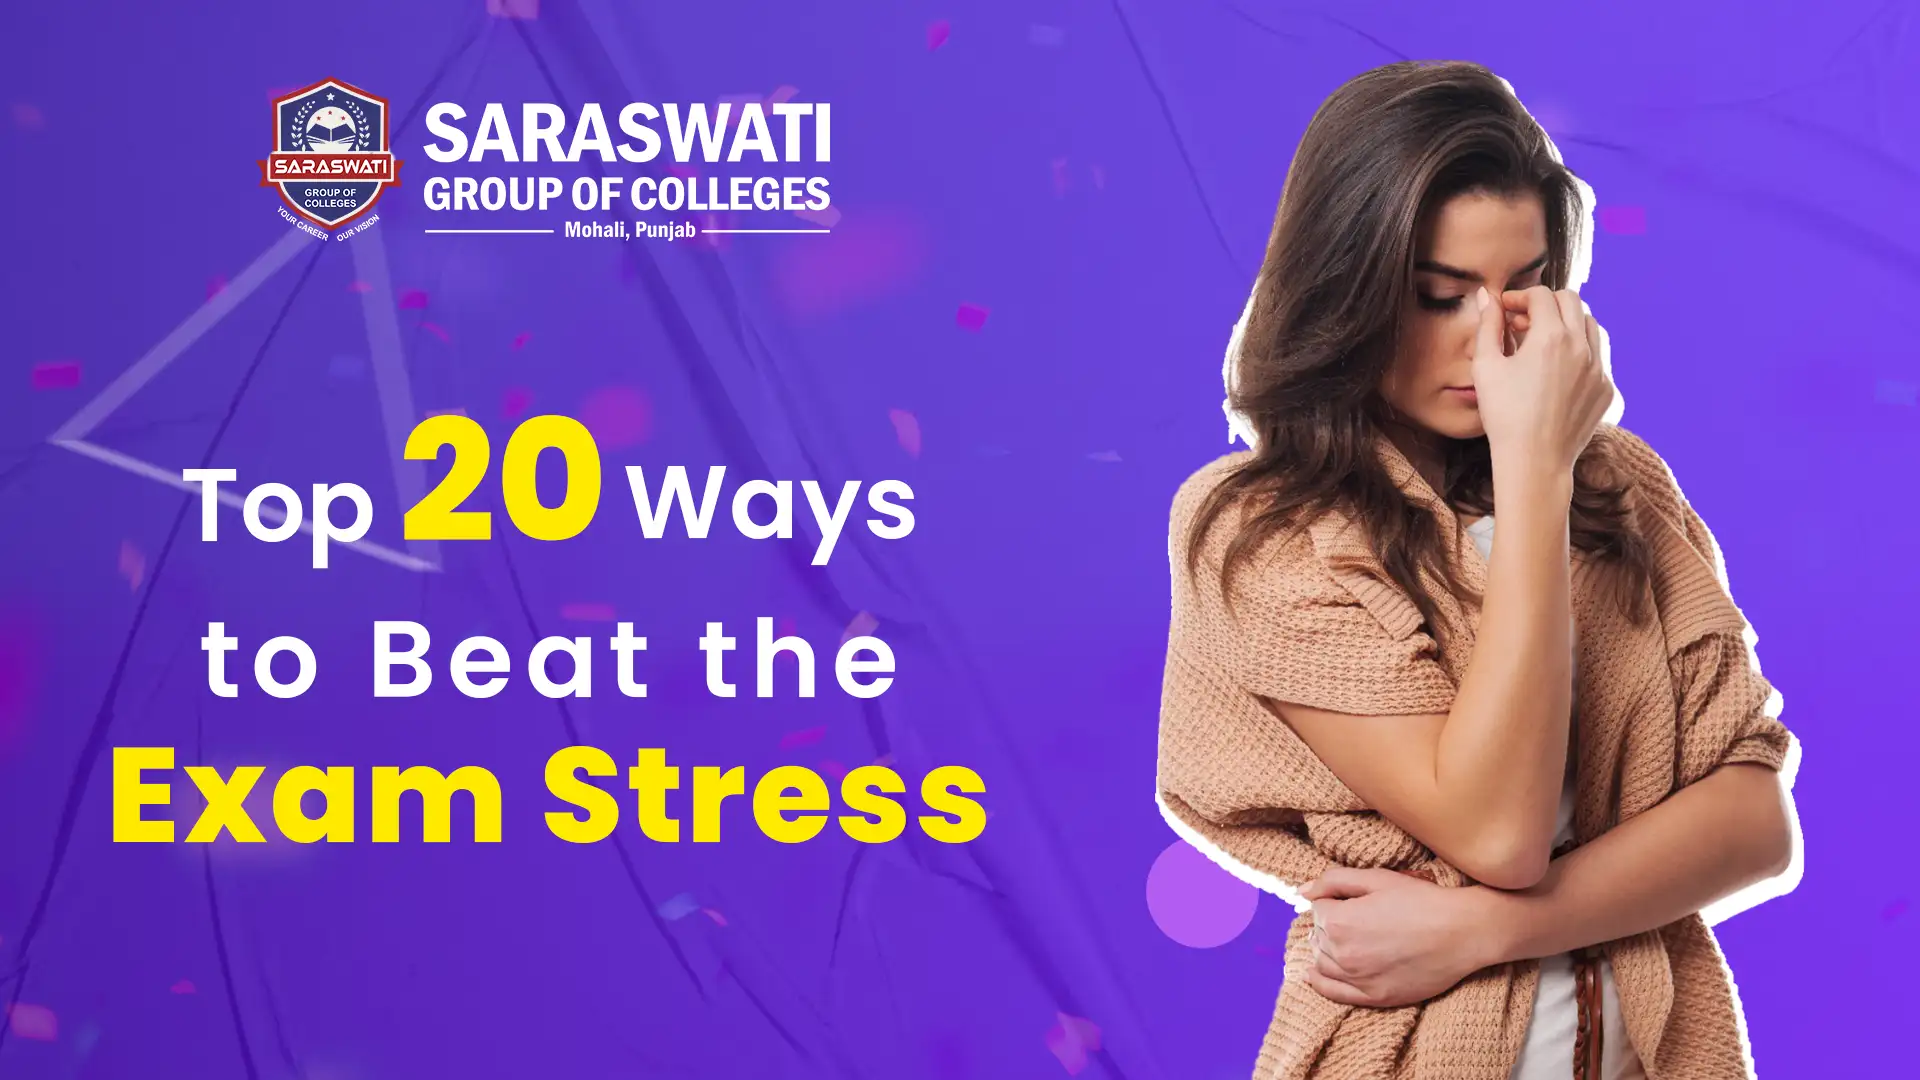 Top 20 Ways to Beat Exam Stress: Effective Strategies for Students